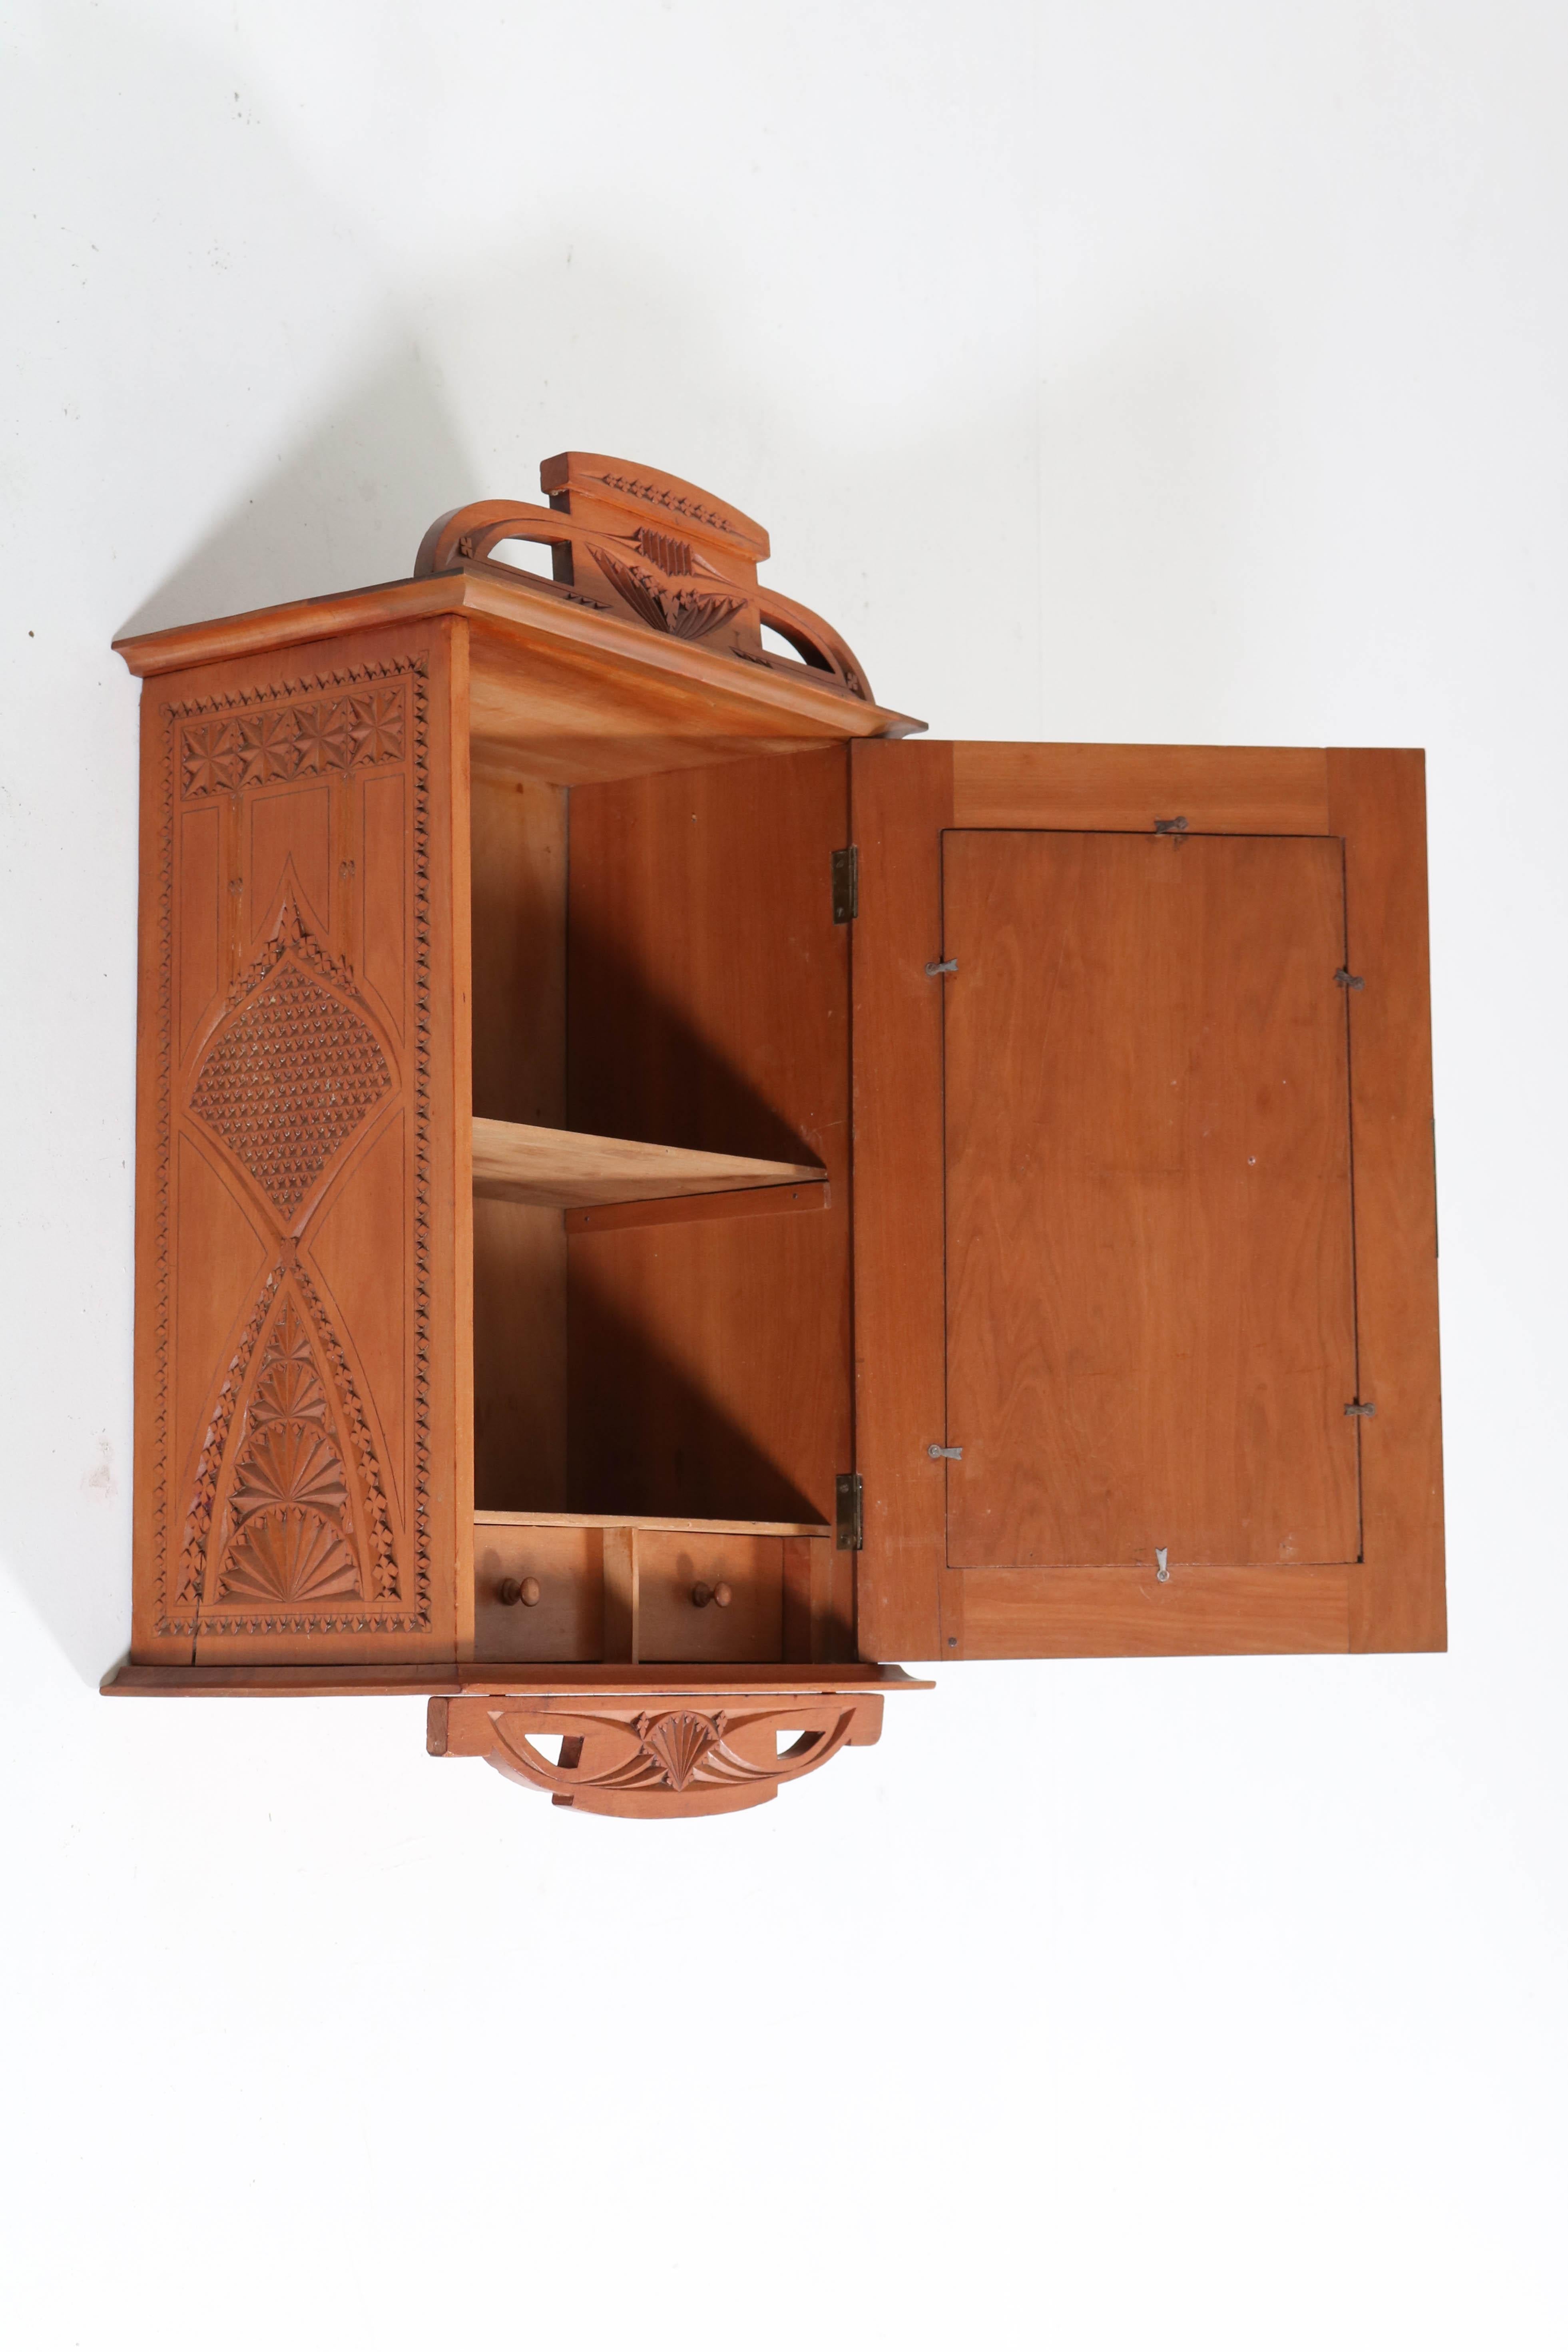 Offered by Amsterdam Modernism:
Stunning and rare Art Nouveau wall cabinet.
Fruitwood with nice kerfschnitt carving.
Striking Dutch design from the 1900s.
In good original condition with minor wear consistent with age and use,
preserving a beautiful